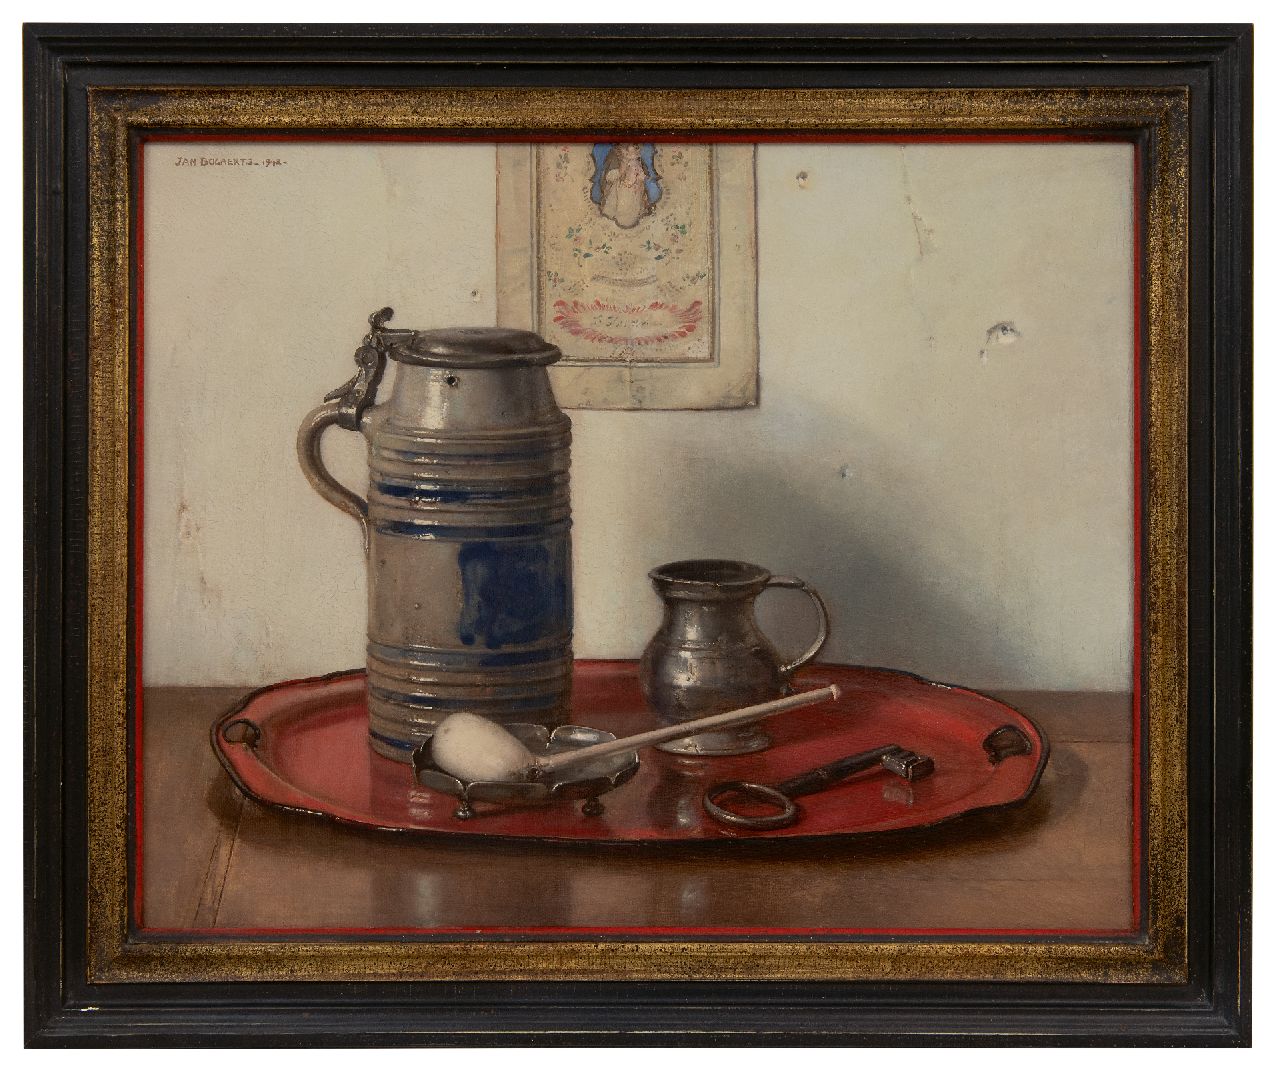 Bogaerts J.J.M.  | Johannes Jacobus Maria 'Jan' Bogaerts | Paintings offered for sale | Still life with a Cologne jug and a Gouda pipe, oil on canvas 40.3 x 50.0 cm, signed u.l. and dated 1942